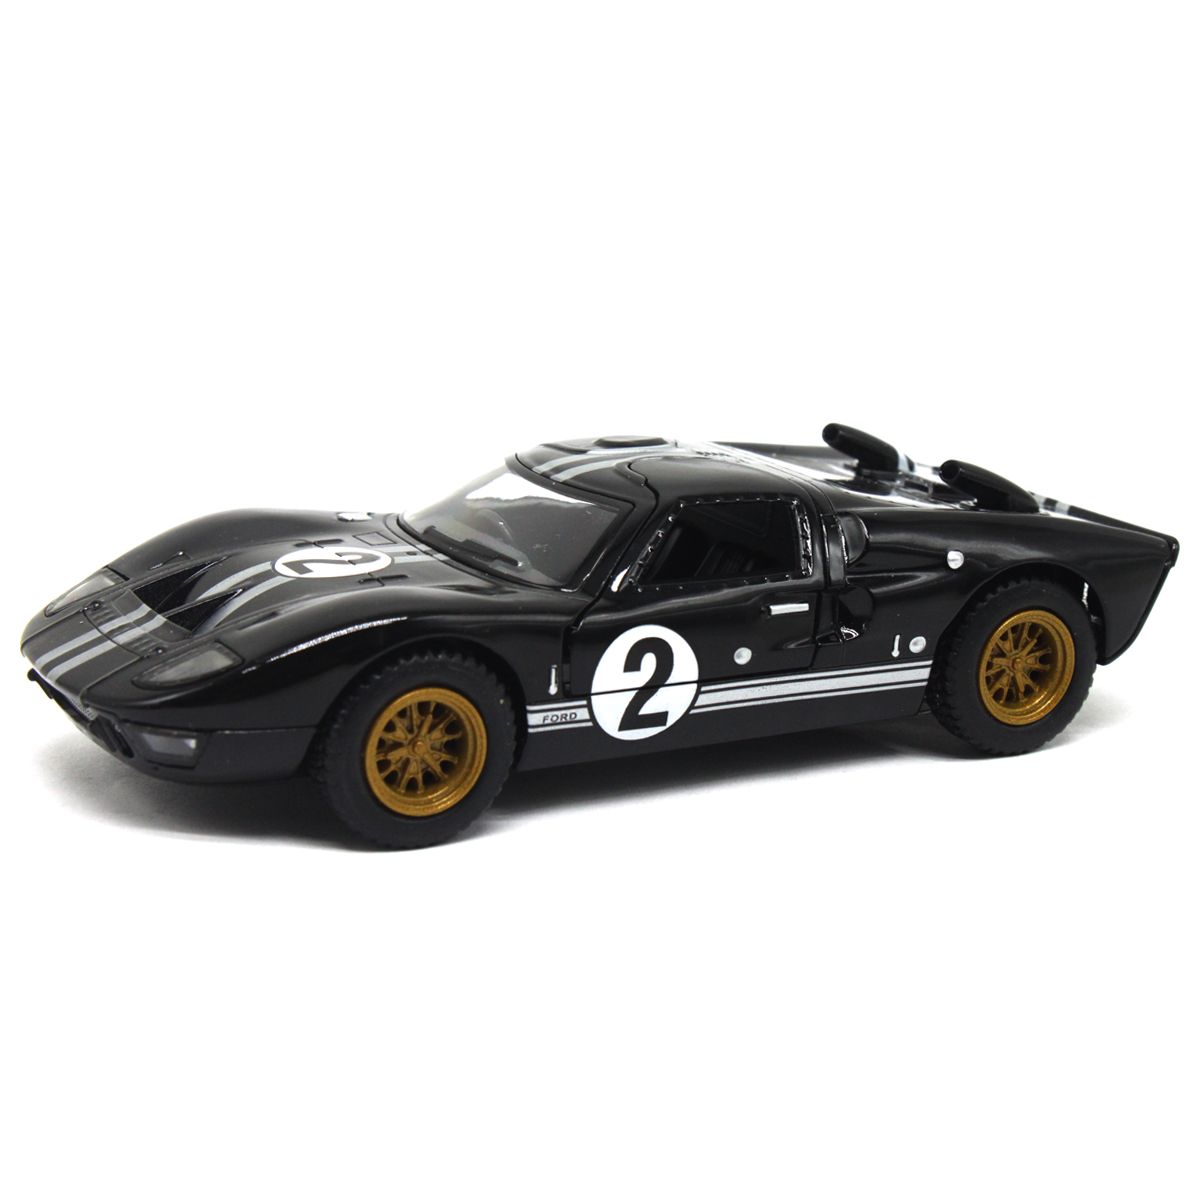 Машинка "Ford GT 40 MKII Heritage", чорна